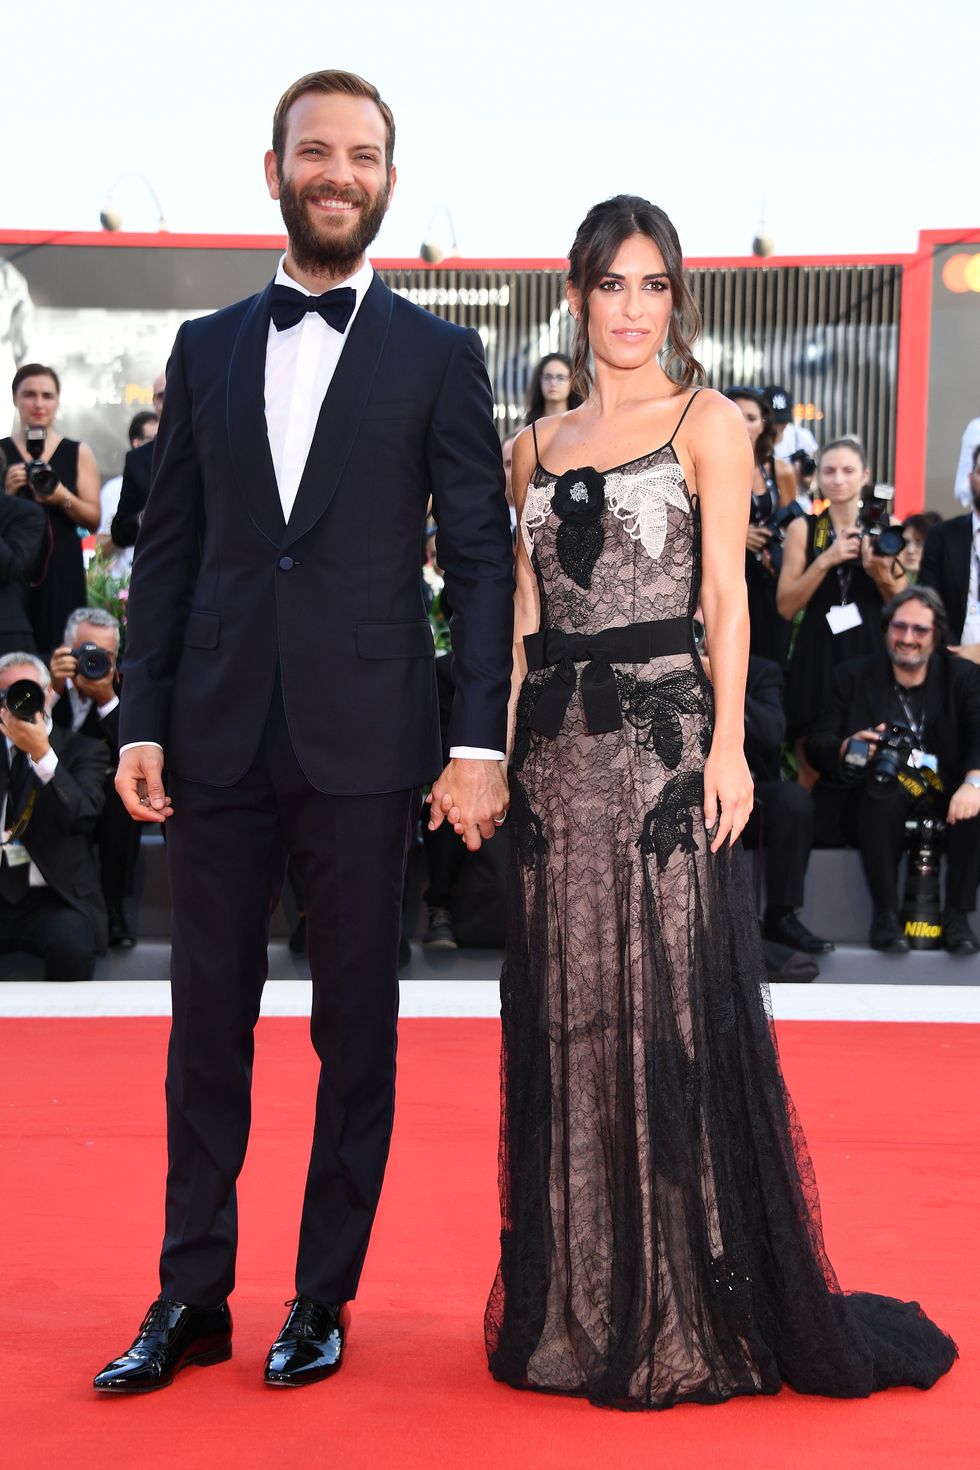 VENICE, ITALY - AUGUST 30:  Festival host Alessandro Borghi and Roberta Pitrone  walks the red carpet ahead of the 'Downsizing' screening and Opening Ceremony during the 74th Venice Film Festival at Sala Grande on August 30, 2017 in Venice, Italy.  (Photo by Pascal Le Segretain/Getty Images)